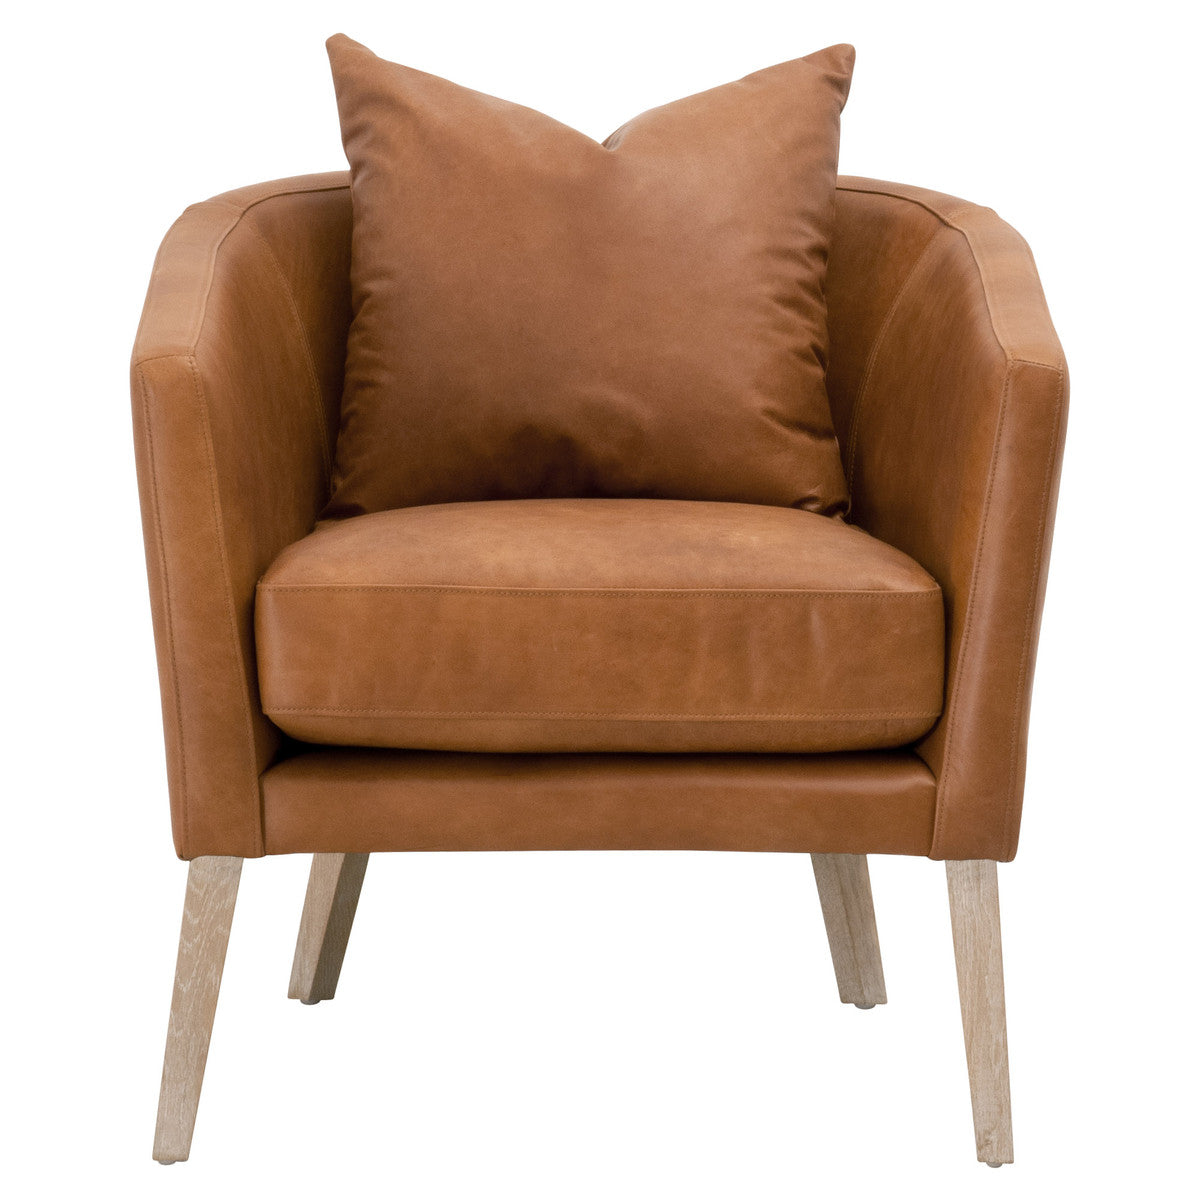 Gordon Club Chair in Whiskey Brown Leather & Natural Gray Oak